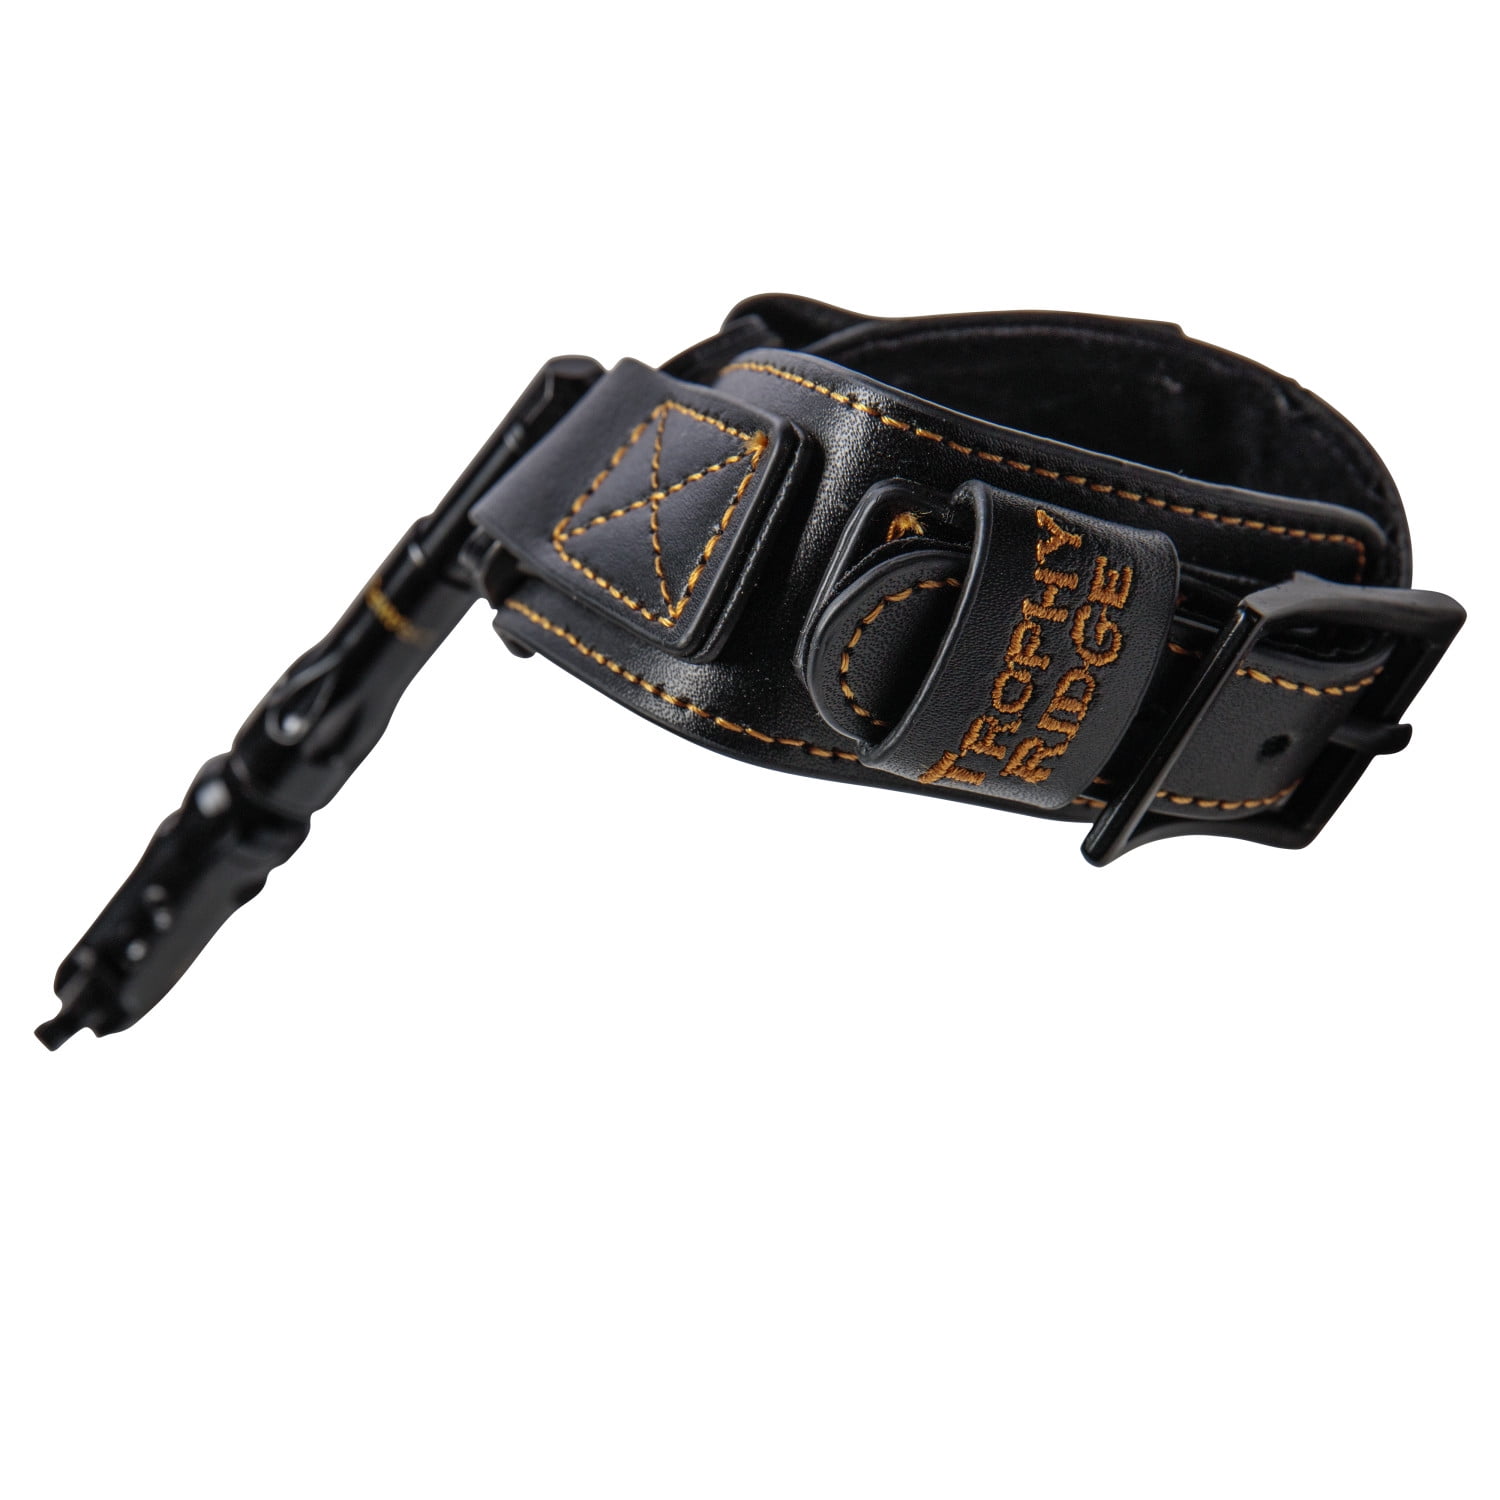 Fletcher DrawPoint Mechanical Release with Wrist Strap 